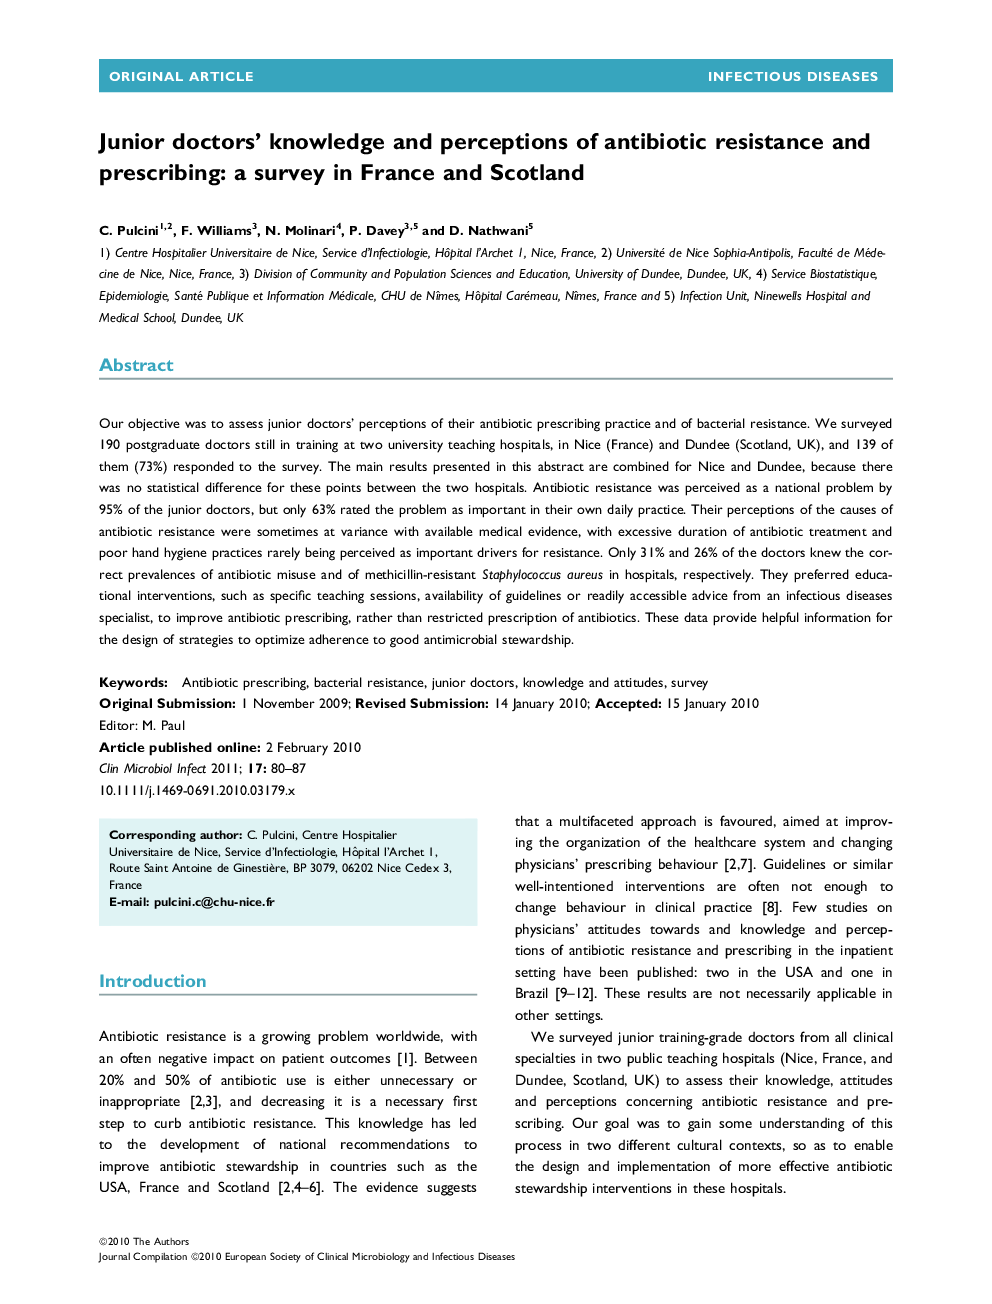 Junior doctors' knowledge and perceptions of antibiotic resistance and prescribing: a survey in France and Scotland 